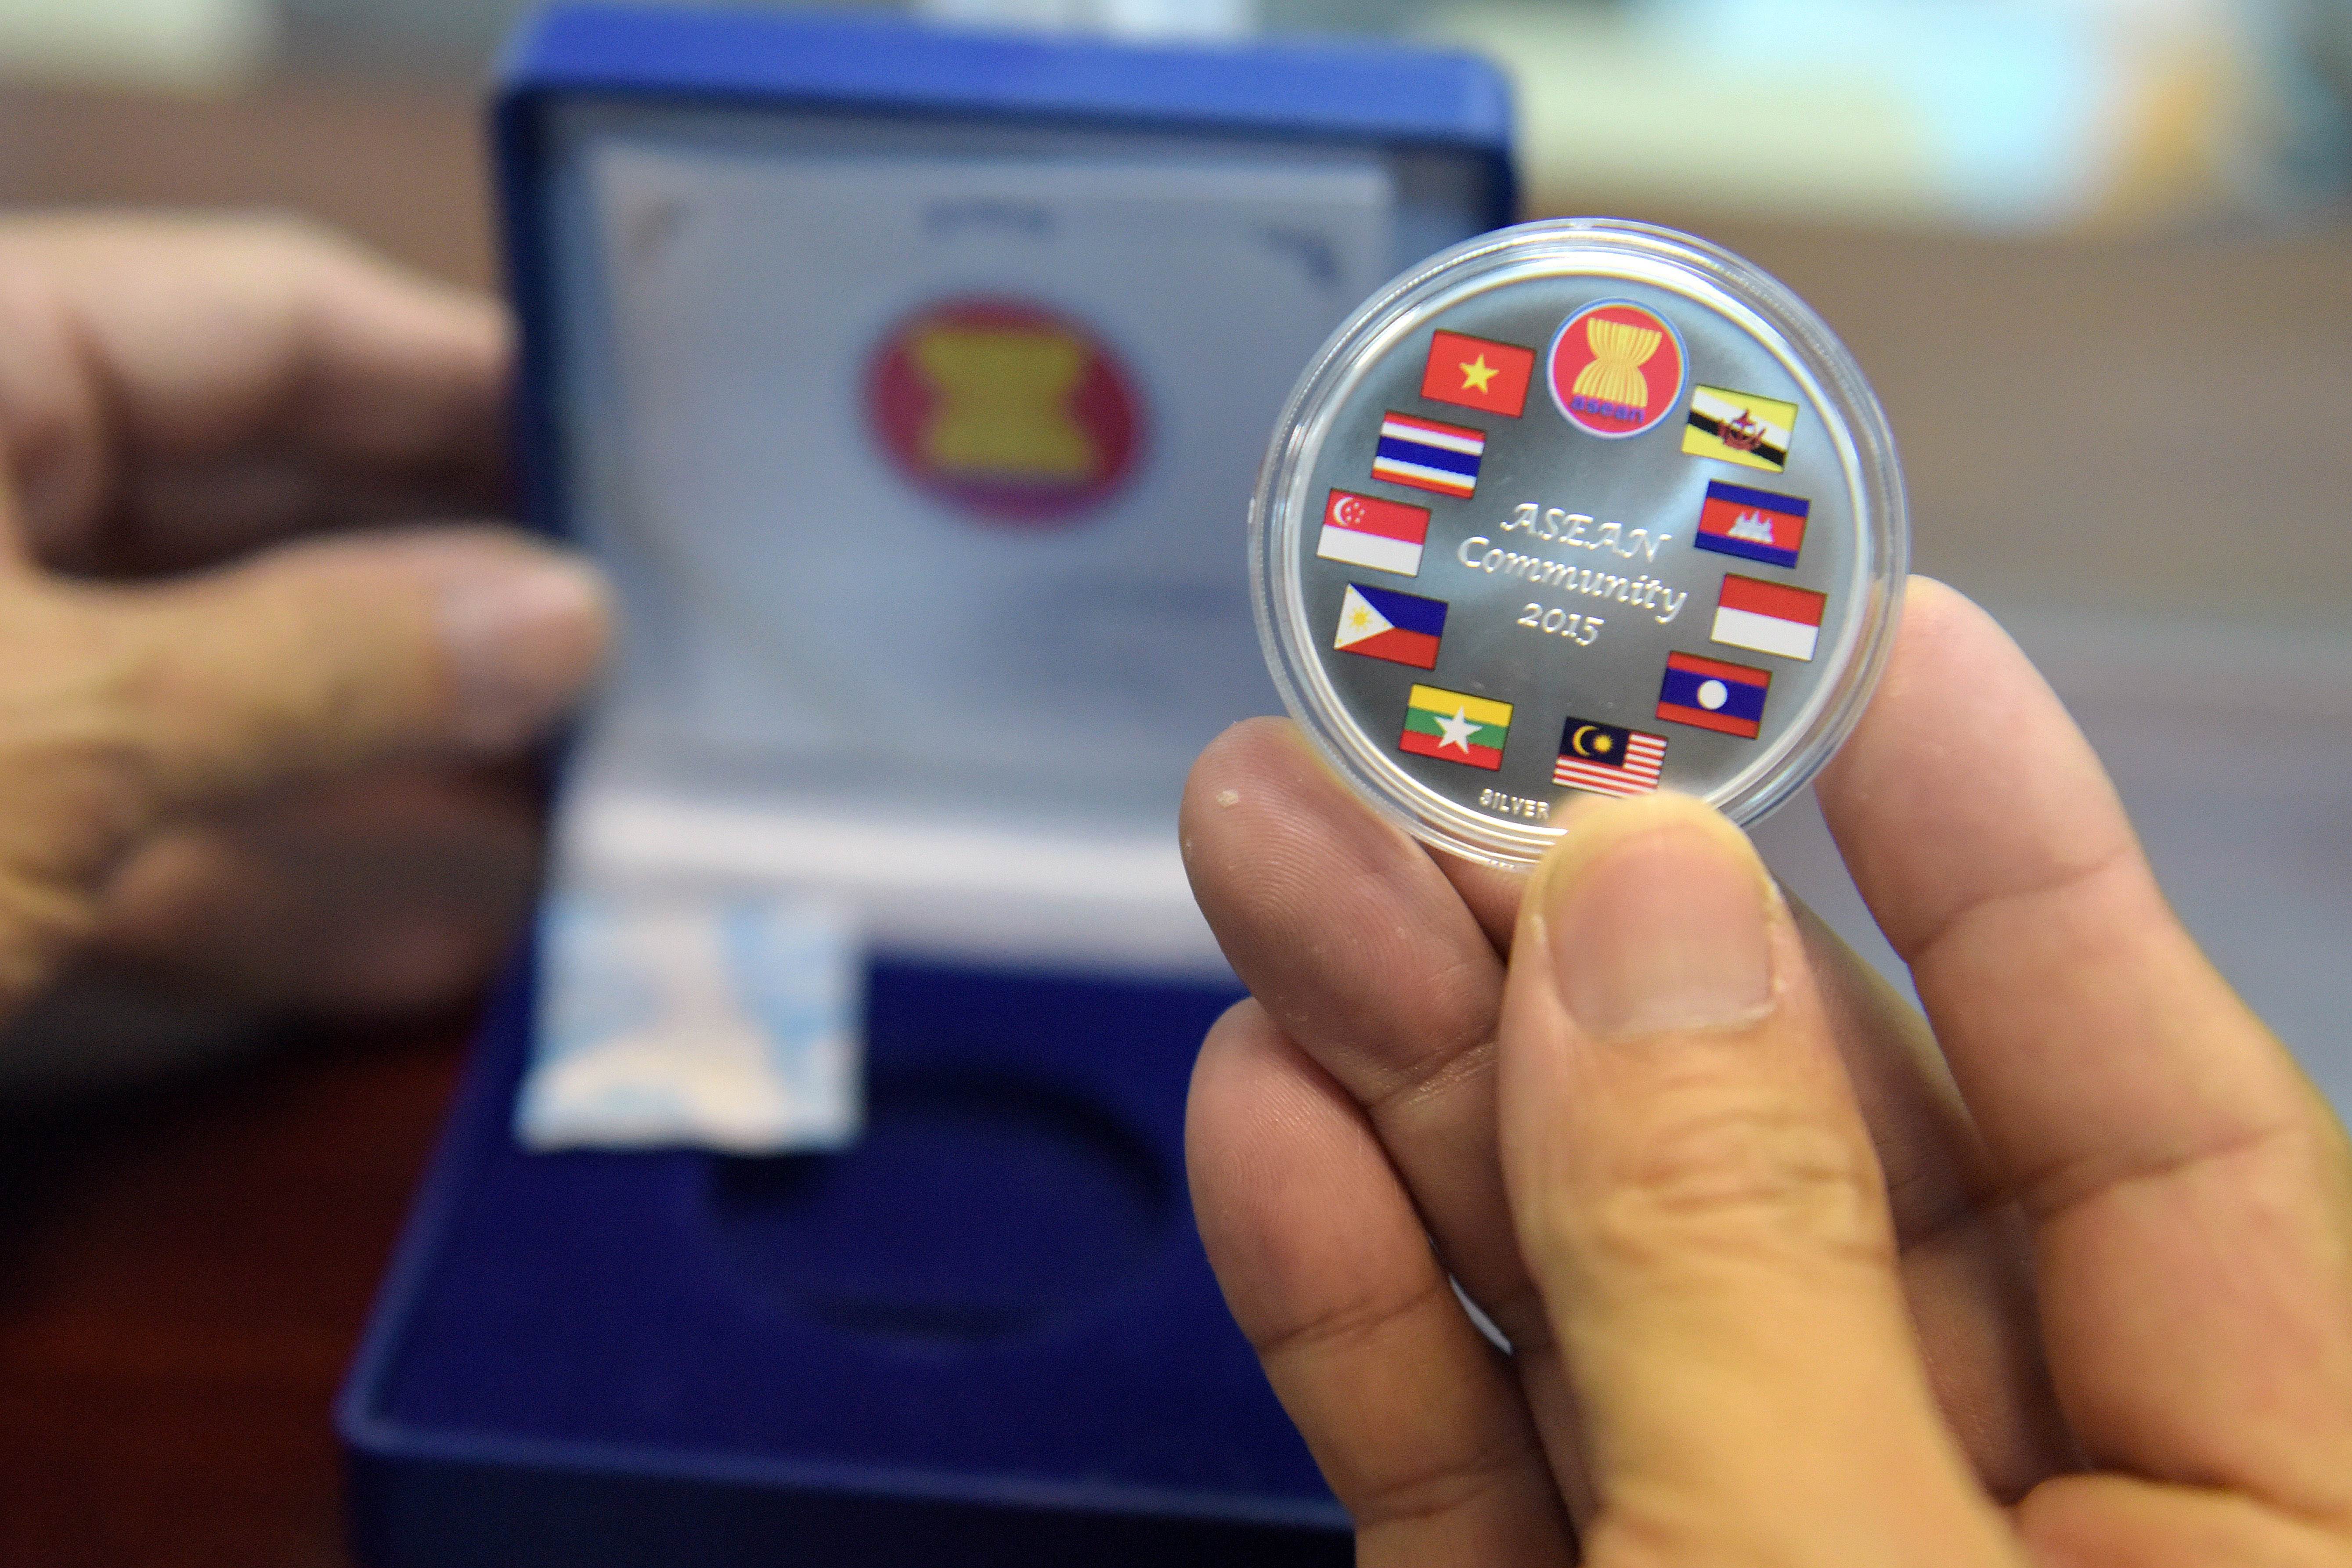 A commemorative coin with flags of ASEAN member countries is seen at the National Bank of Cambodia on December 25, 2015. The National Bank of Cambodia began the sale of silver souvenir coins bearing flags of Association of Southeast Asian Nations (ASEAN) to celebrate ASEAN community 2015 and ASEAN Economy Community (AEC) in 2016. AFP PHOTO / TANG CHHIN SOTHY